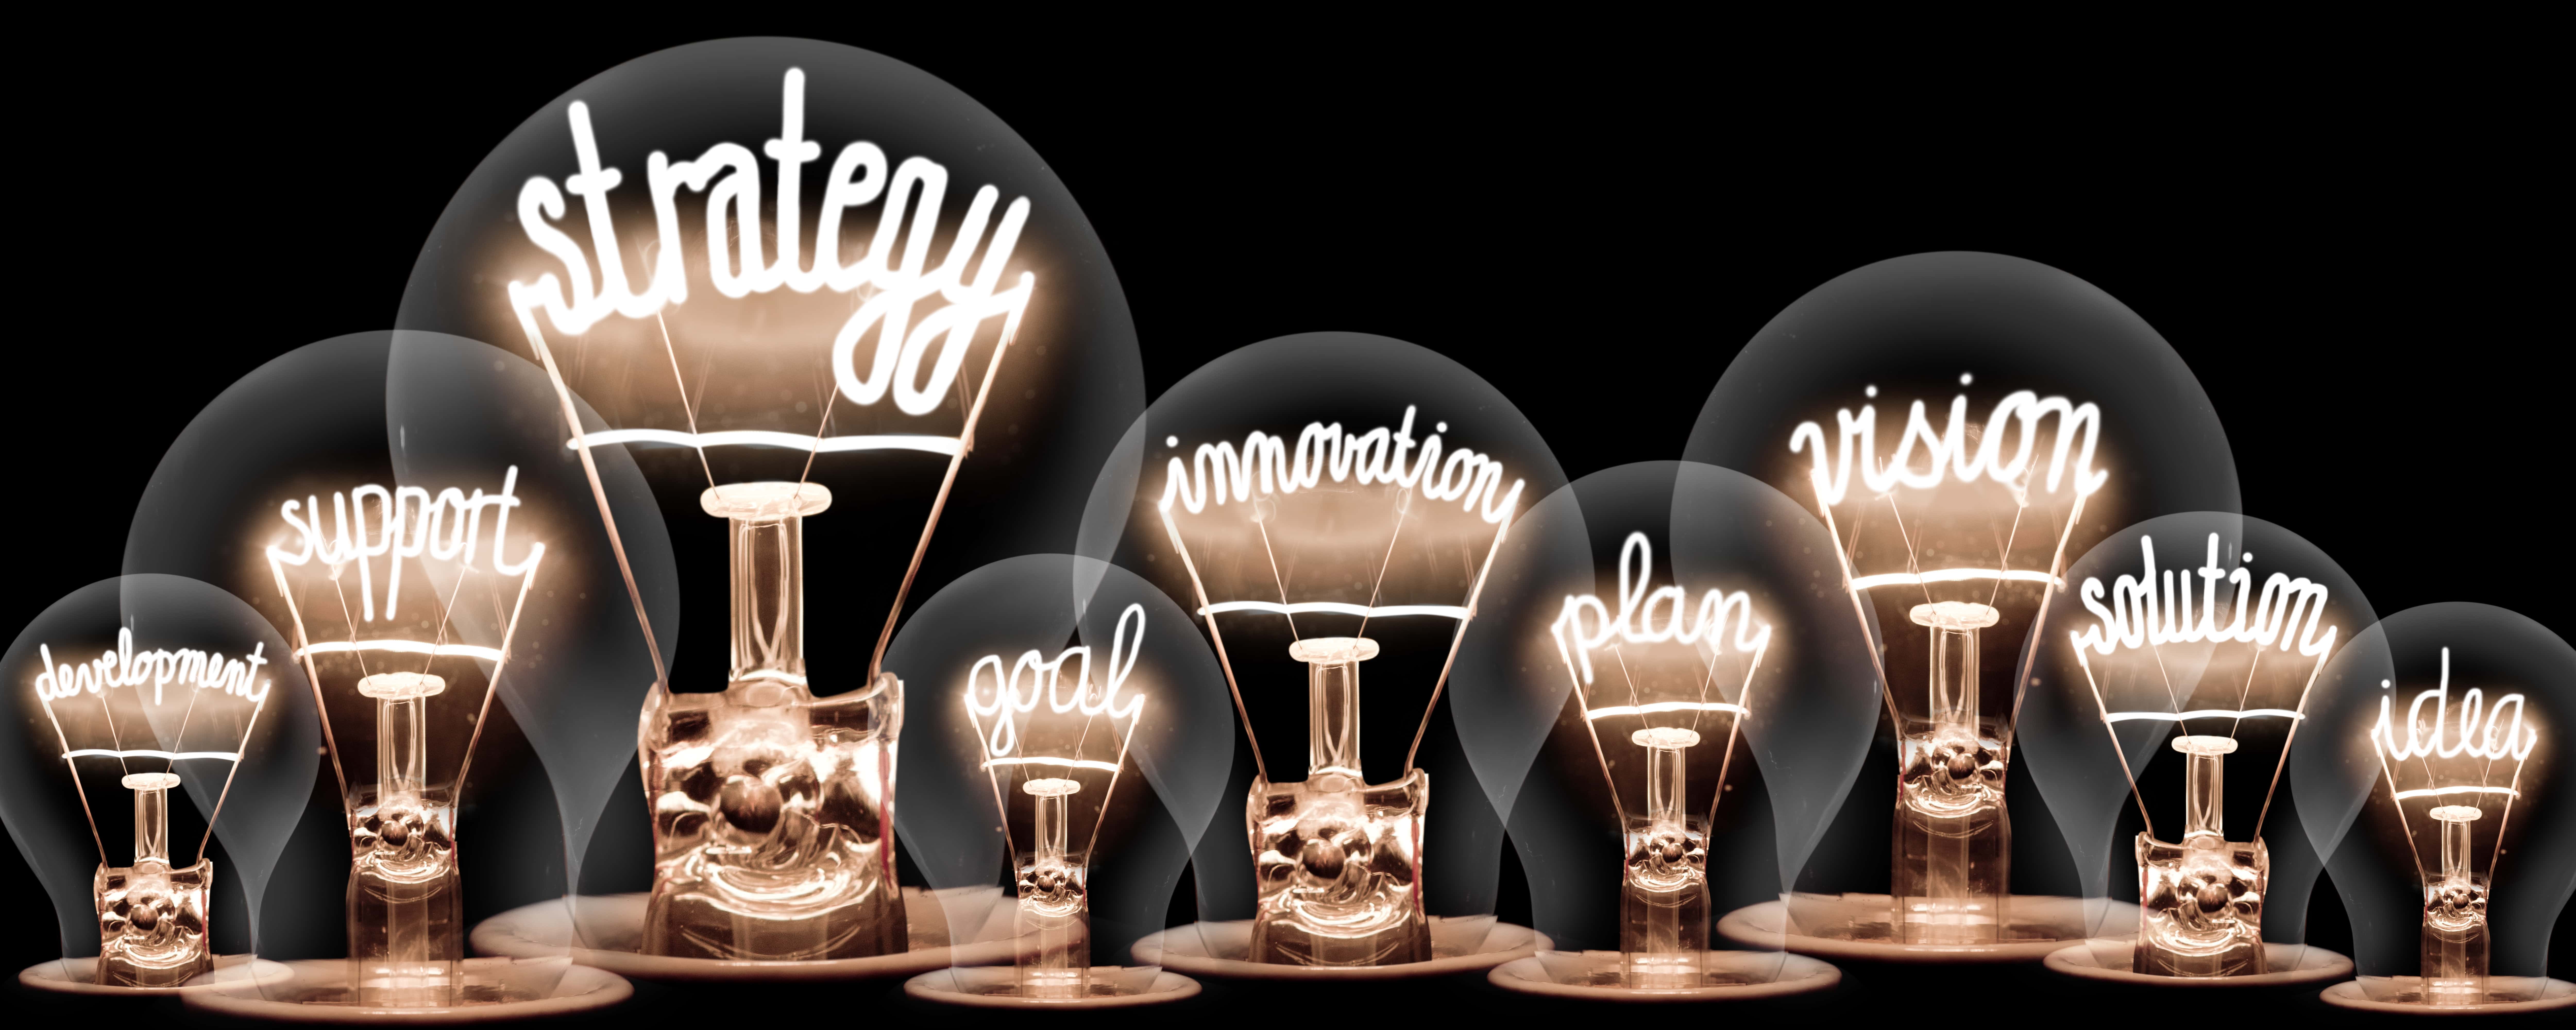 Lightbulbs showing the words development, support, strategy and other inspiring words